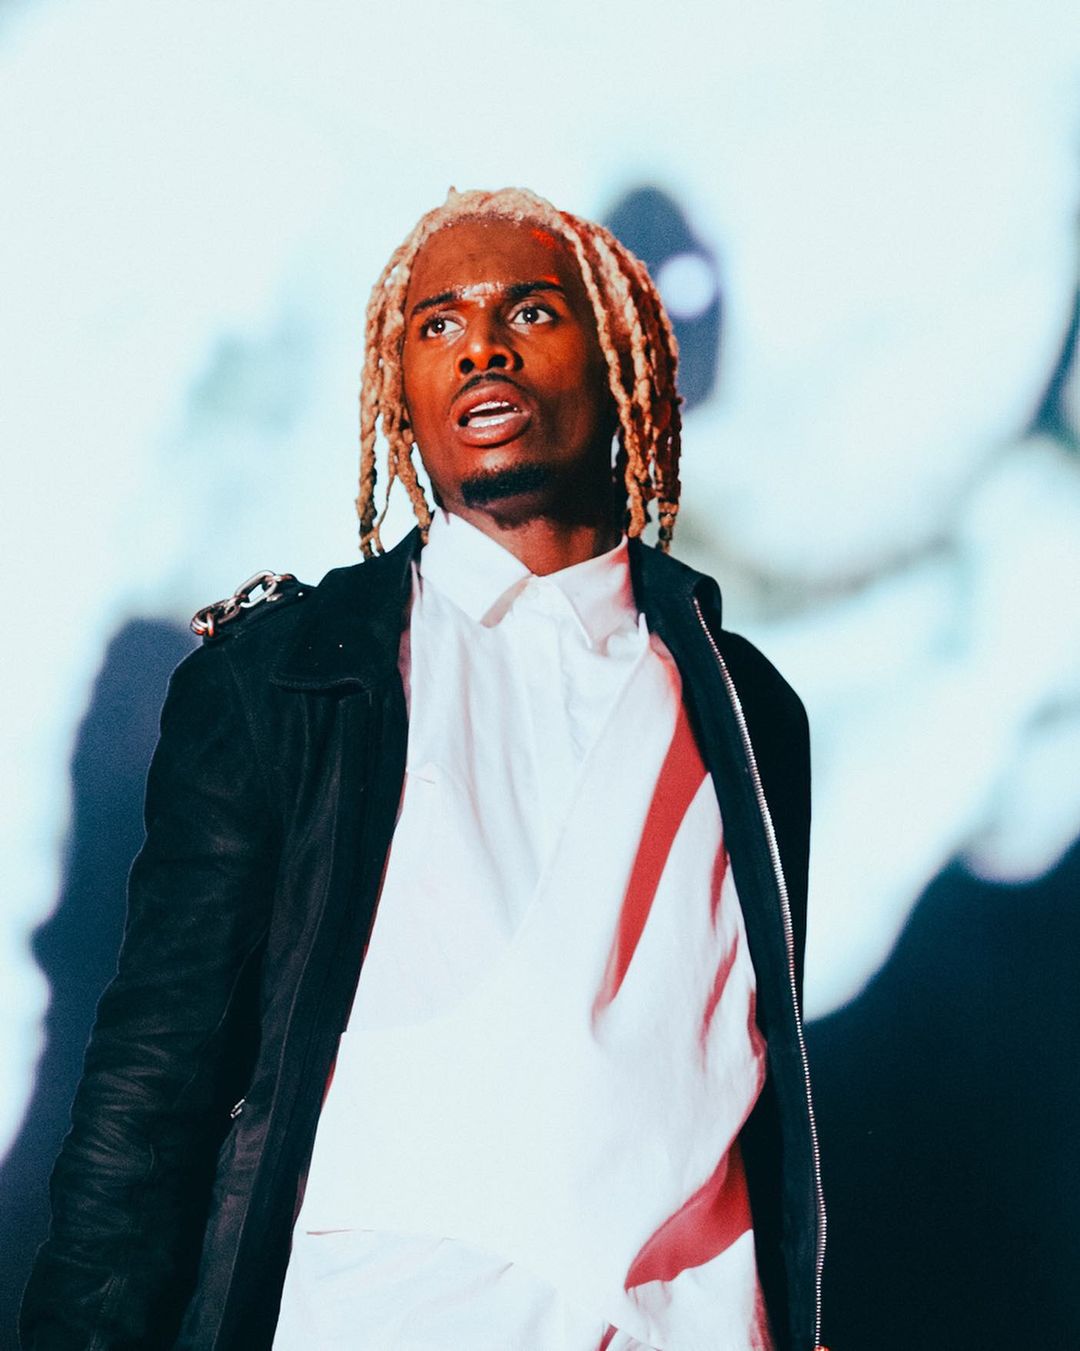 Fans Rush Stage, Abruptly Ending Playboi Carti Concert - The Source